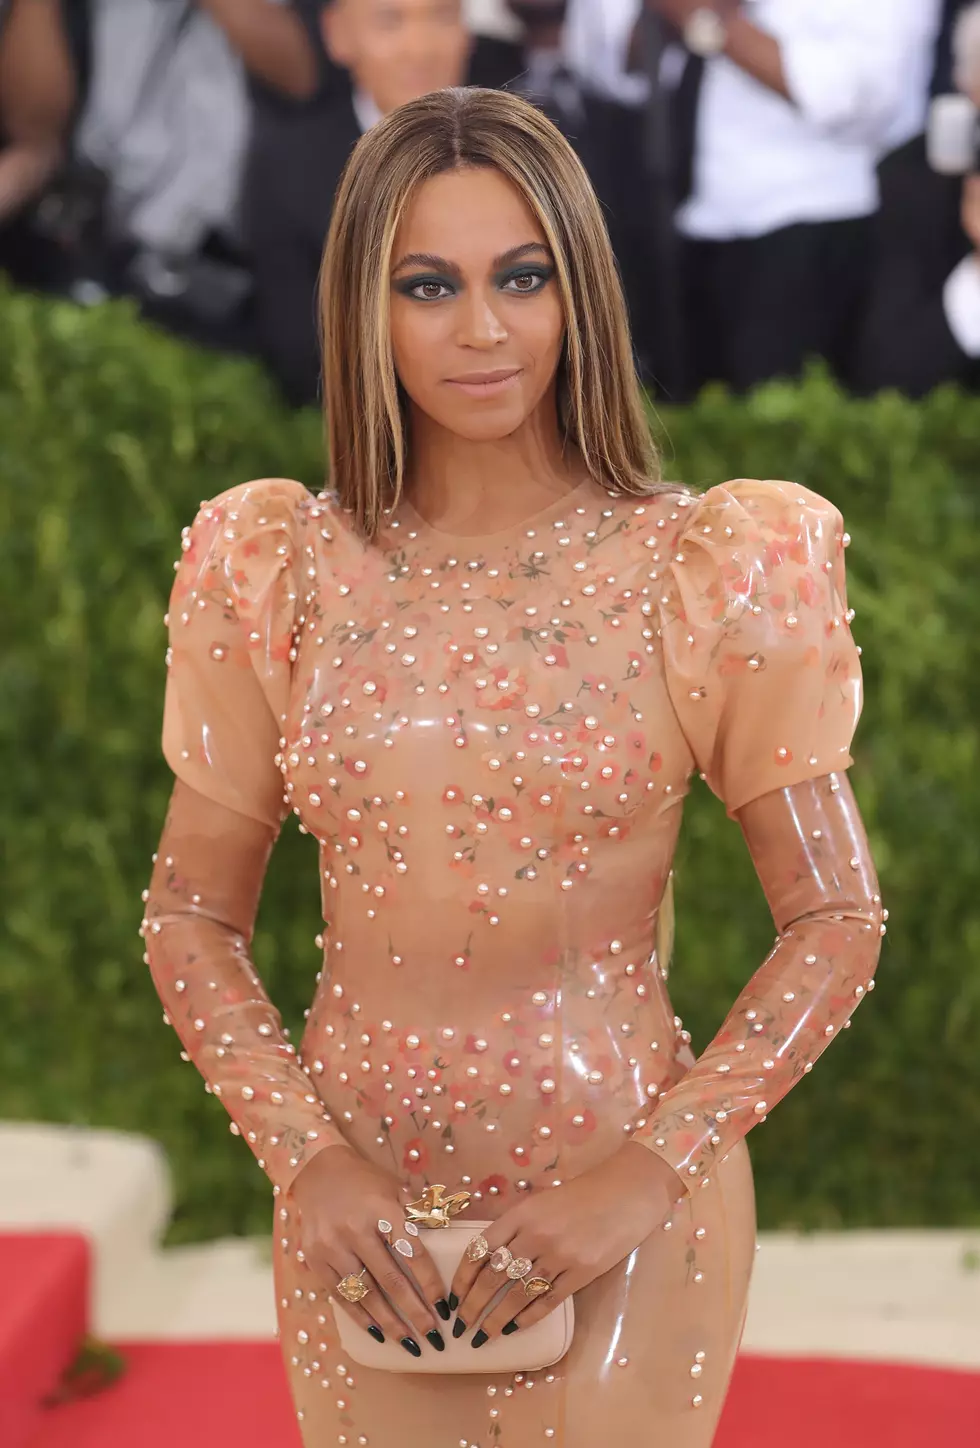 Beyonce Could Be Gearing Up To Drop New Music [Audio]